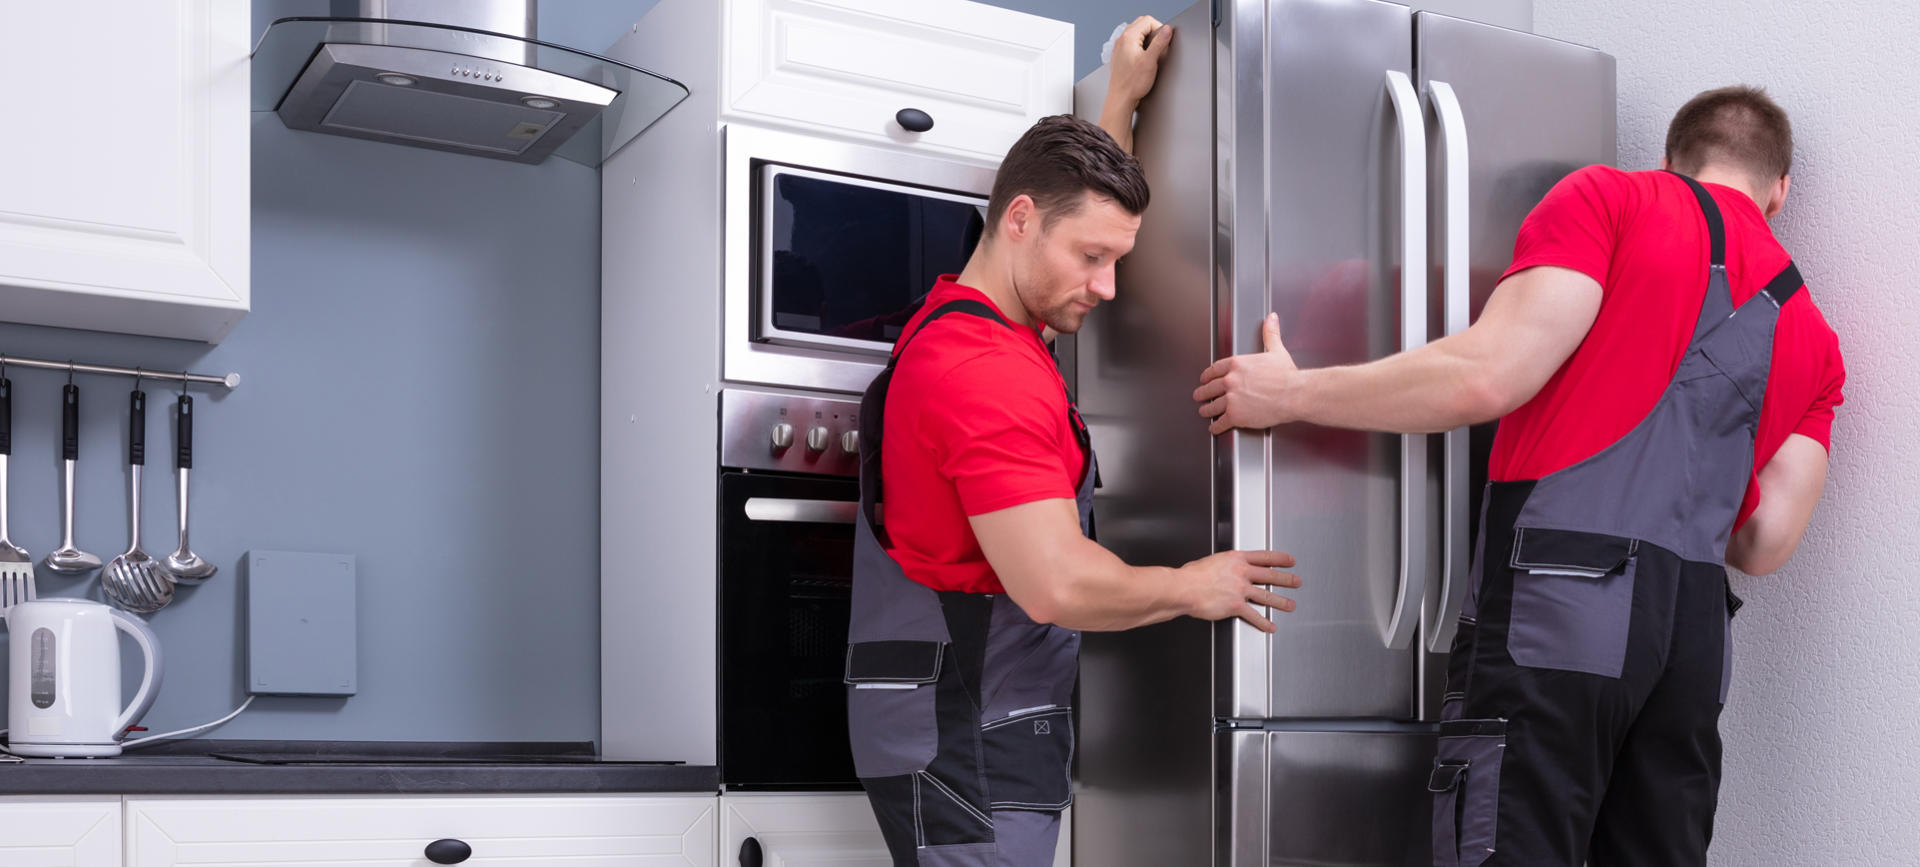 How To Move Refrigerator To Clean Behind